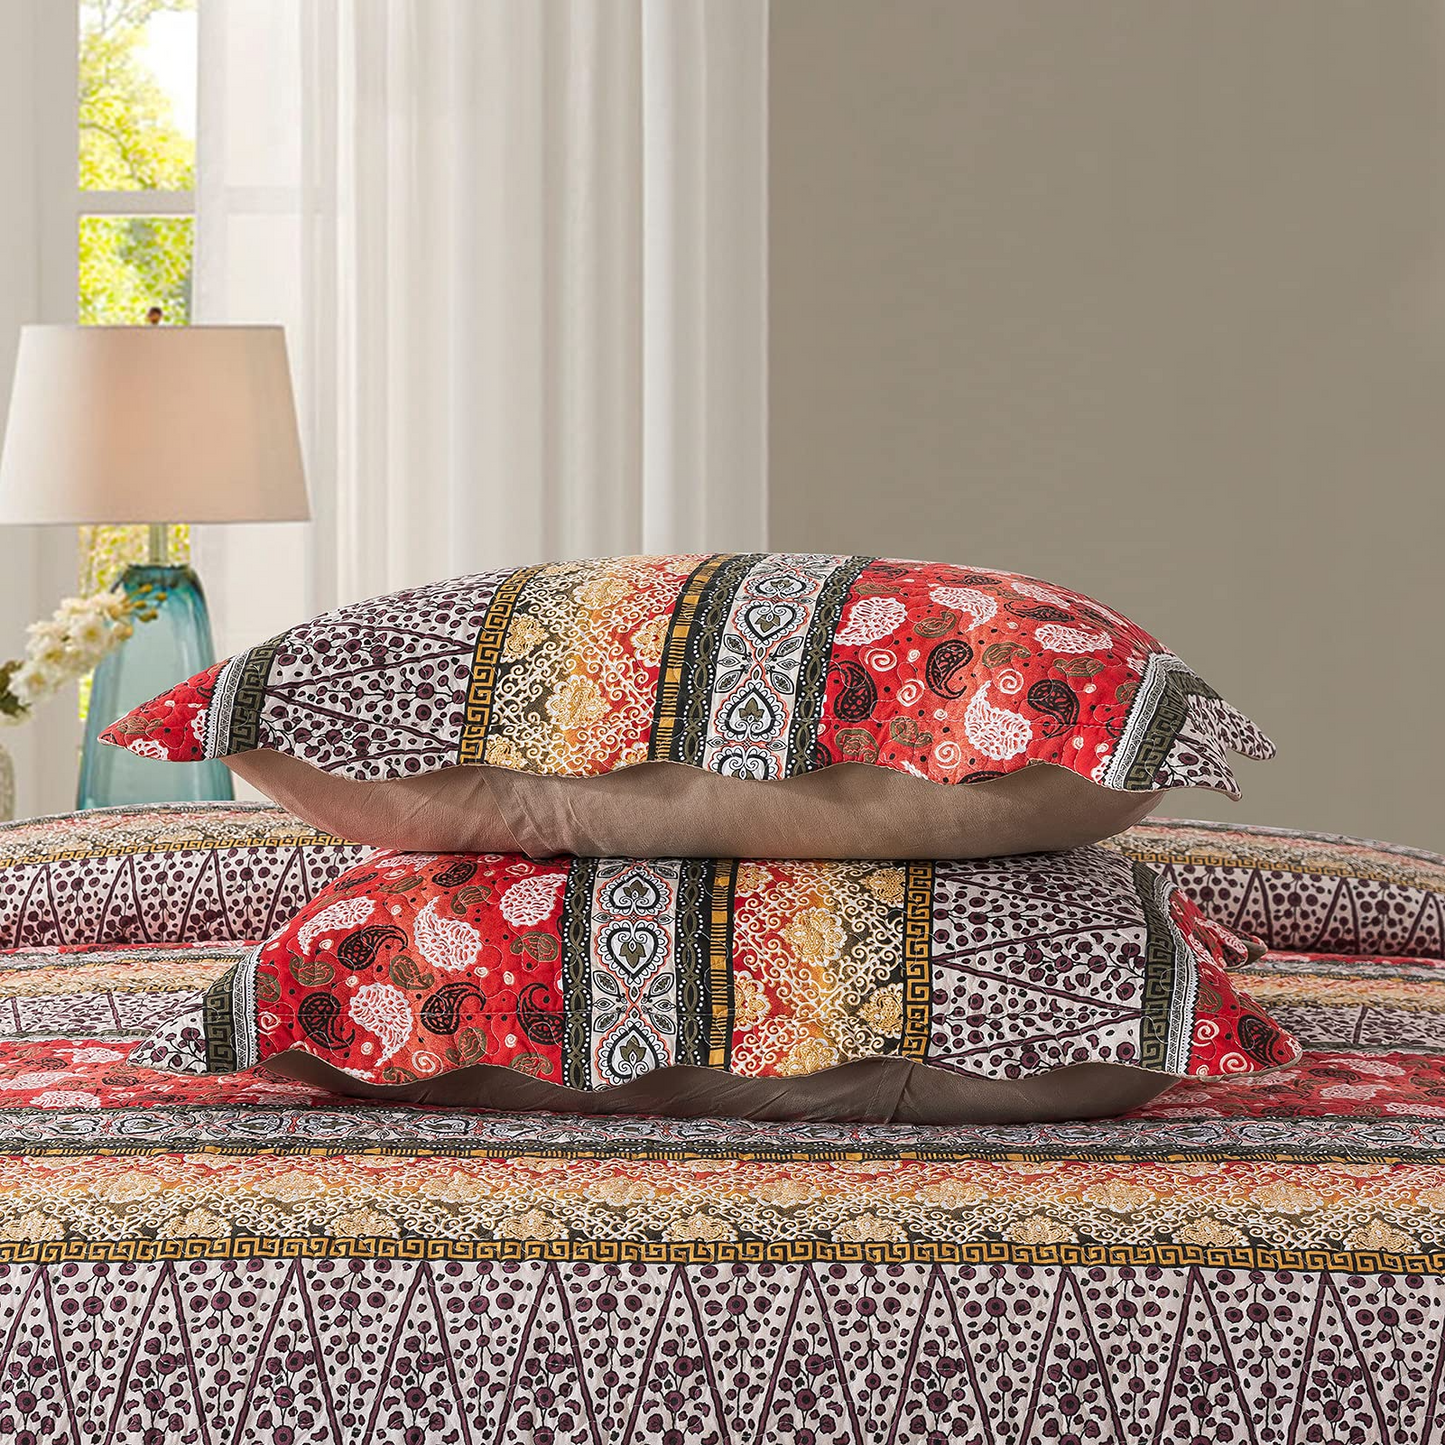 Red Bohemian Style Reversible 3 Pieces Quilt Set with 2 Pillowcases